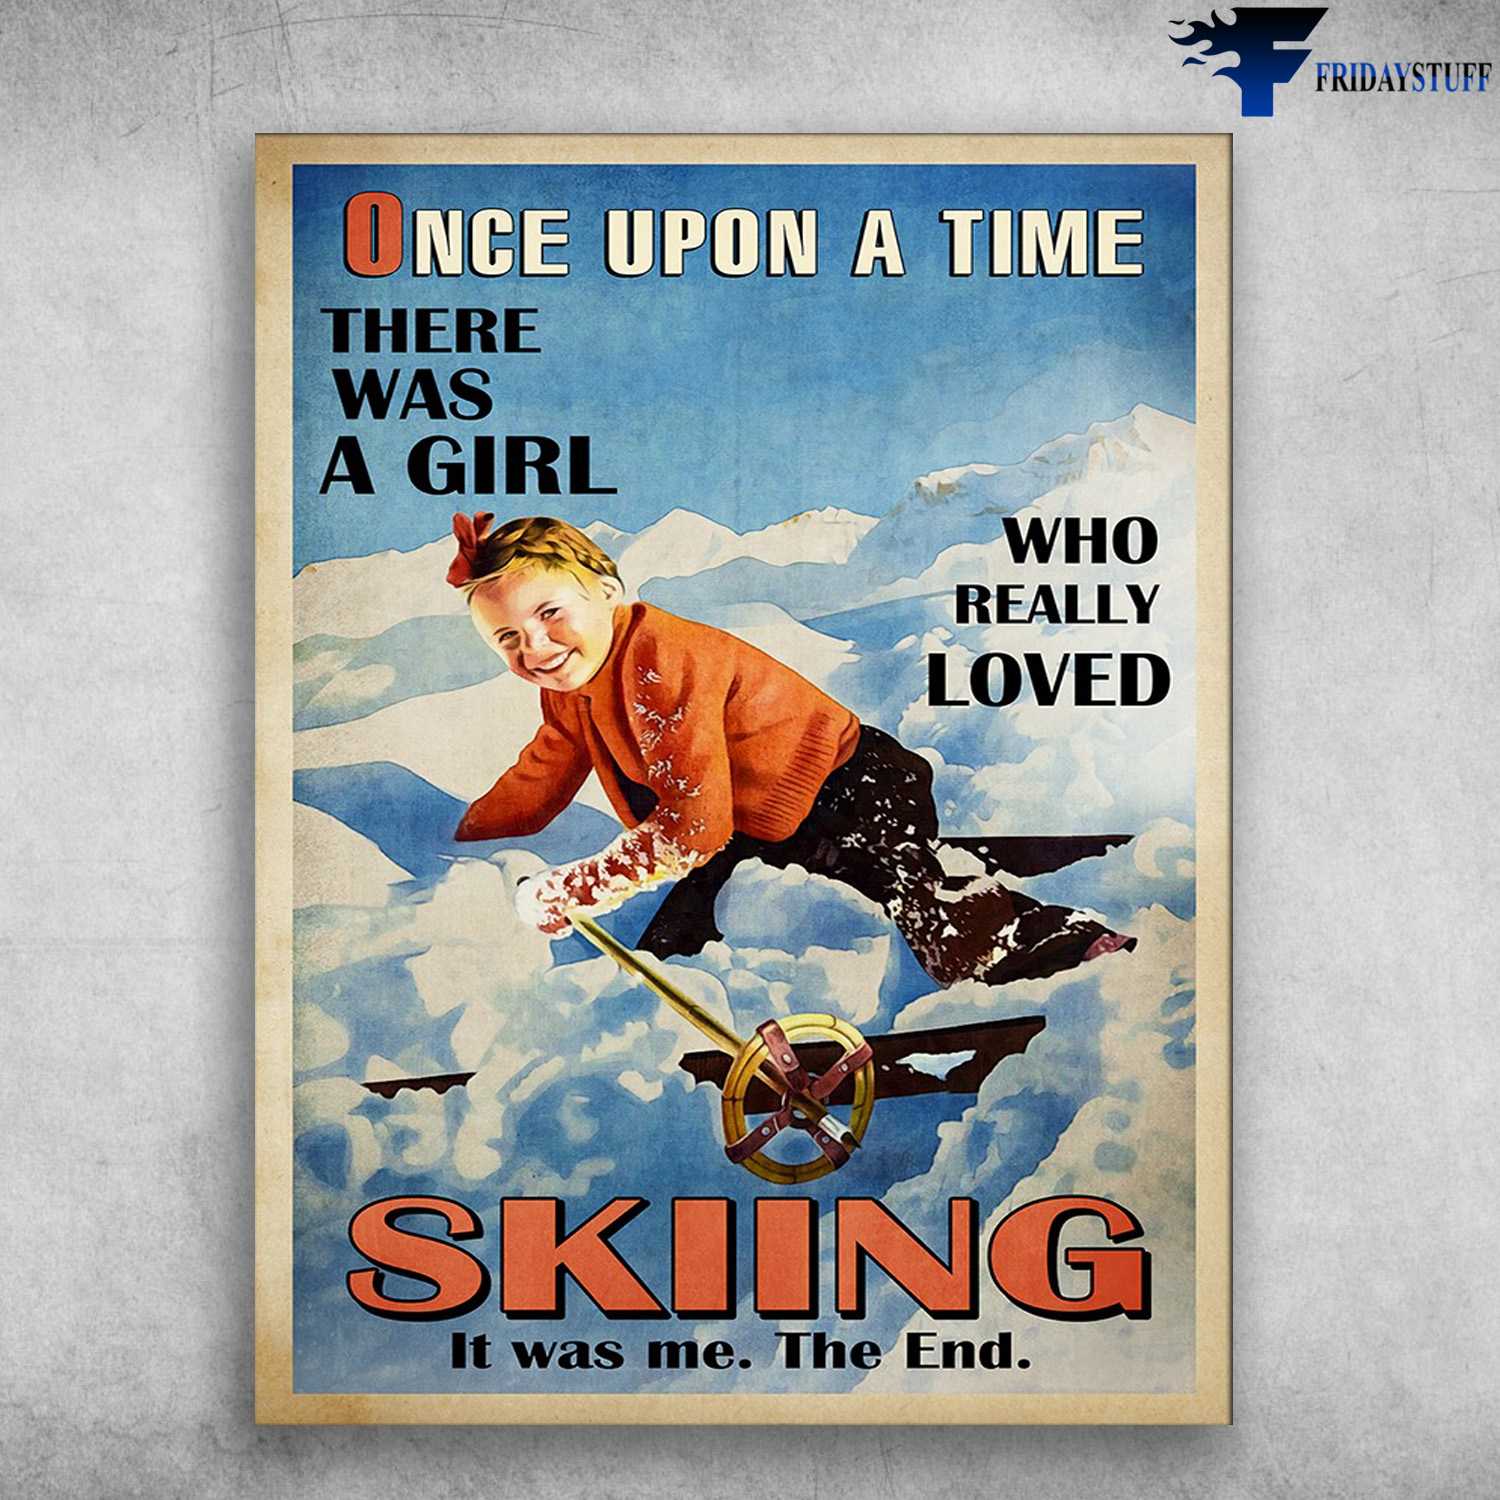 Little Girl Skiing, Skiing Lover - One Upon A Time, There Was A Girl, Who Really Loved Skiing, It Was Me, The End